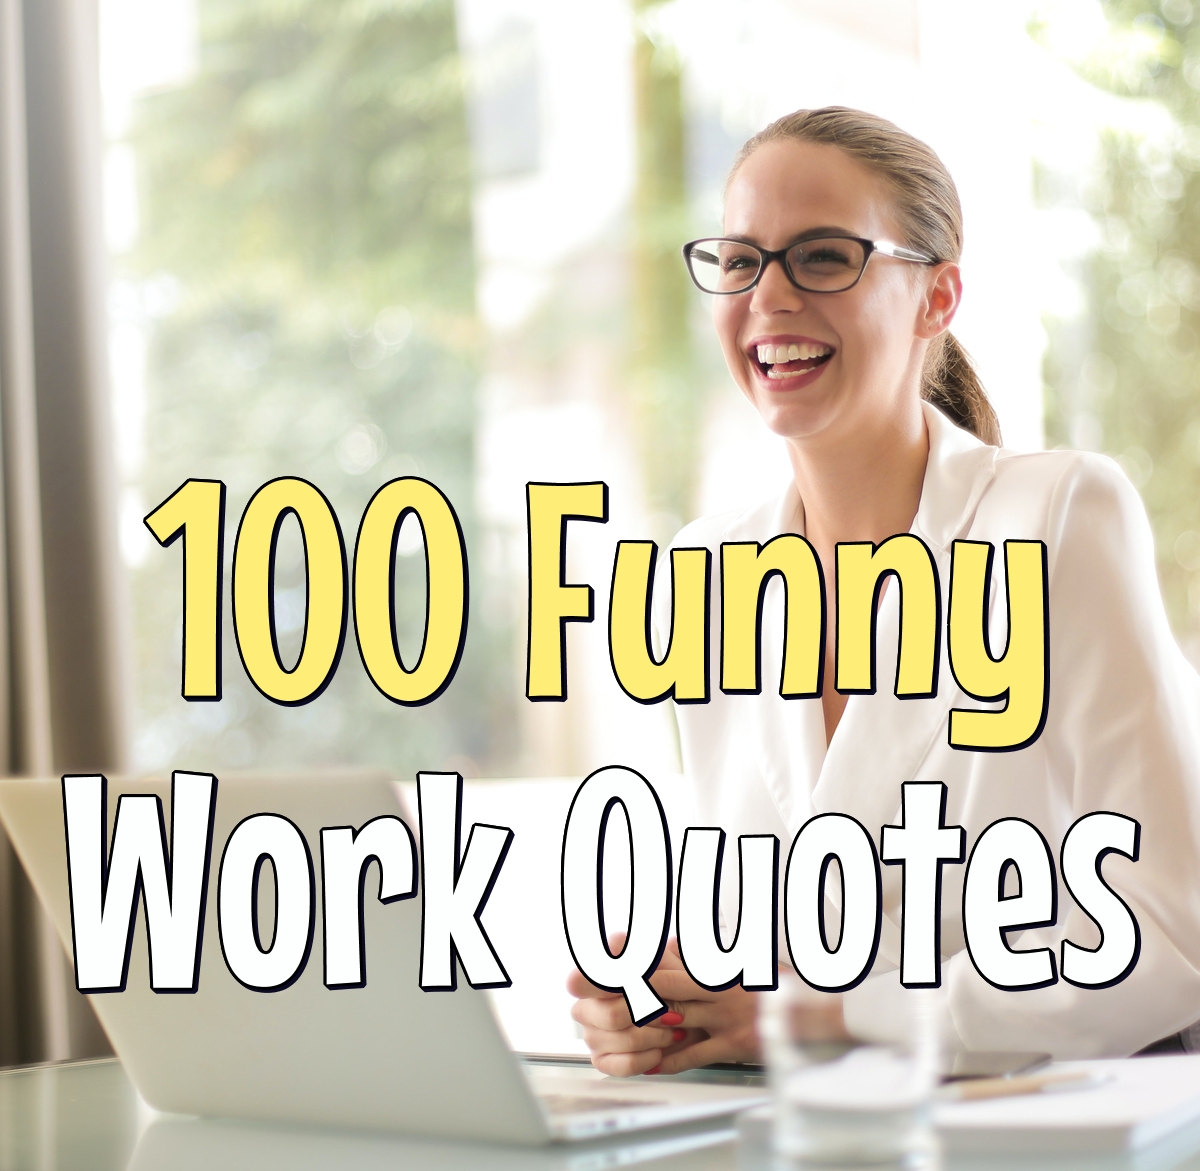 Funny Work Quotes 50 Hilarious Quotes For The Workpla - vrogue.co